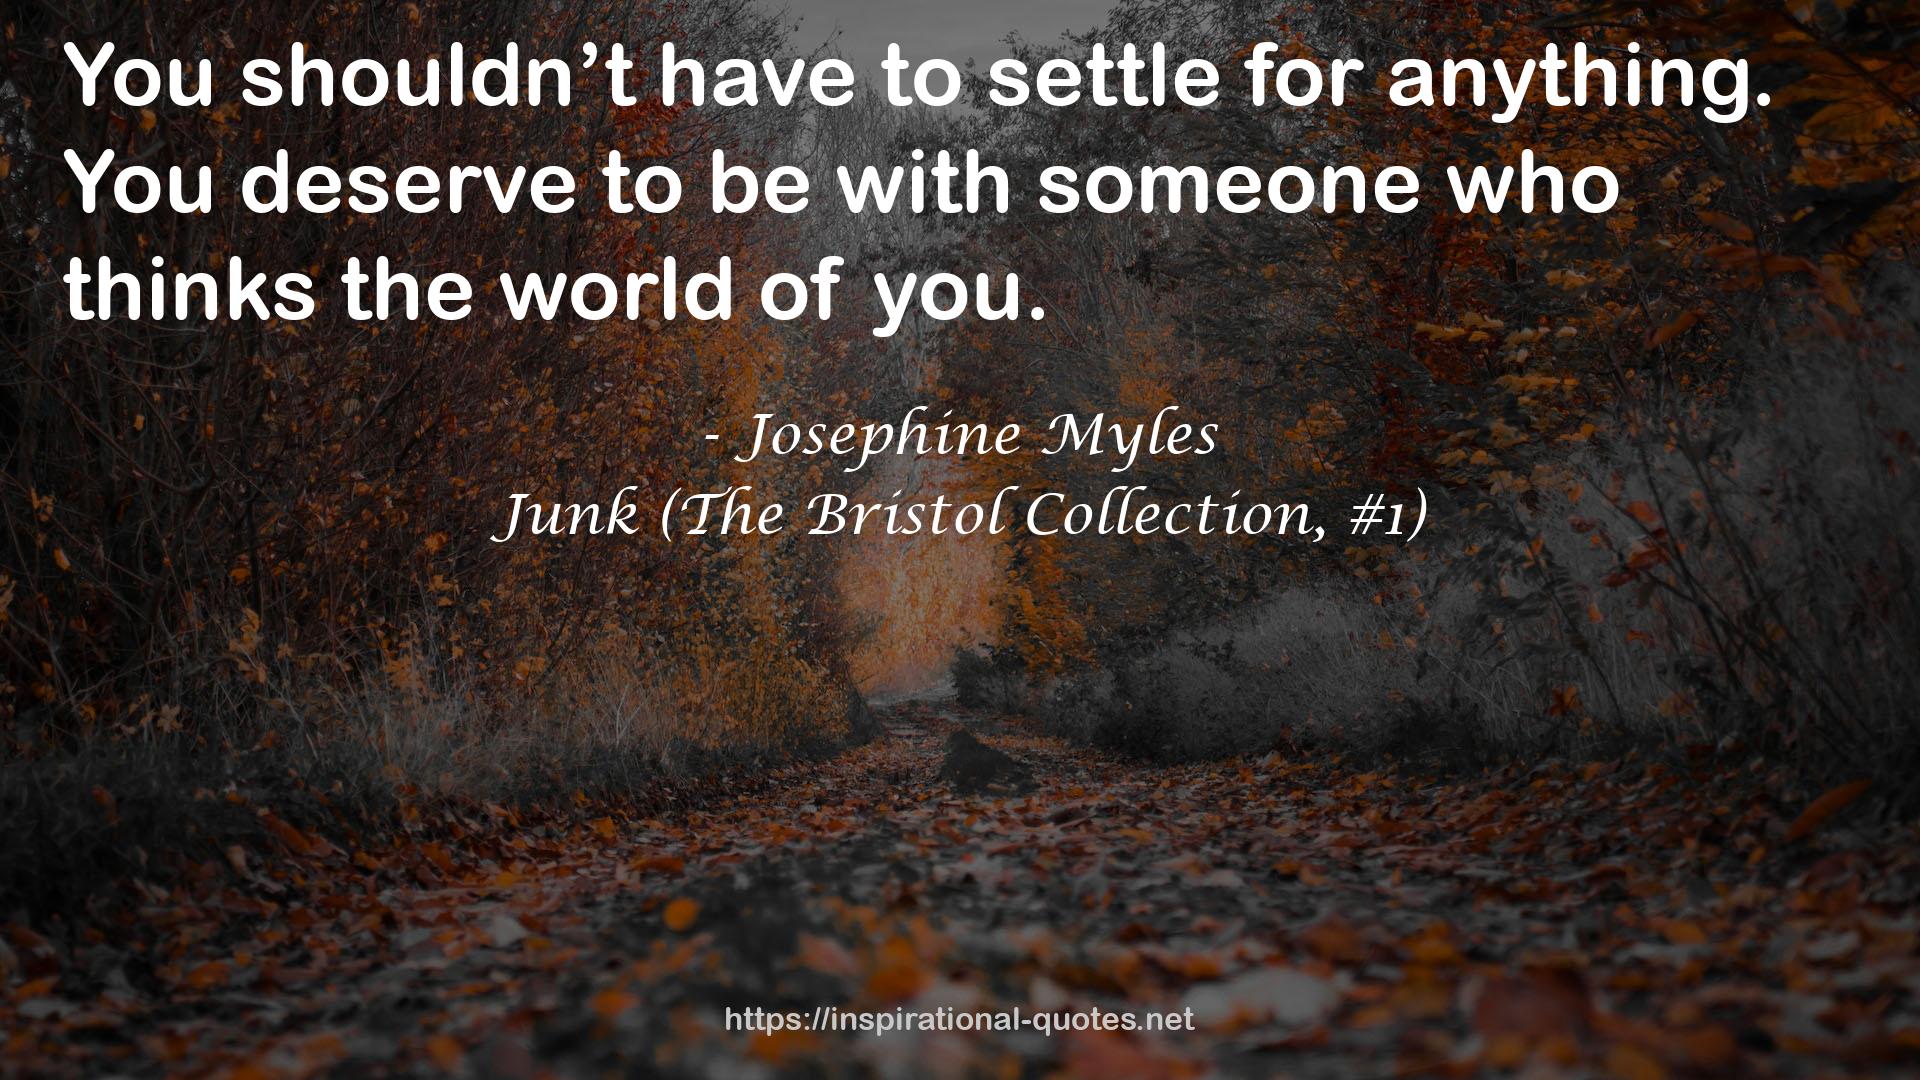 Junk (The Bristol Collection, #1) QUOTES